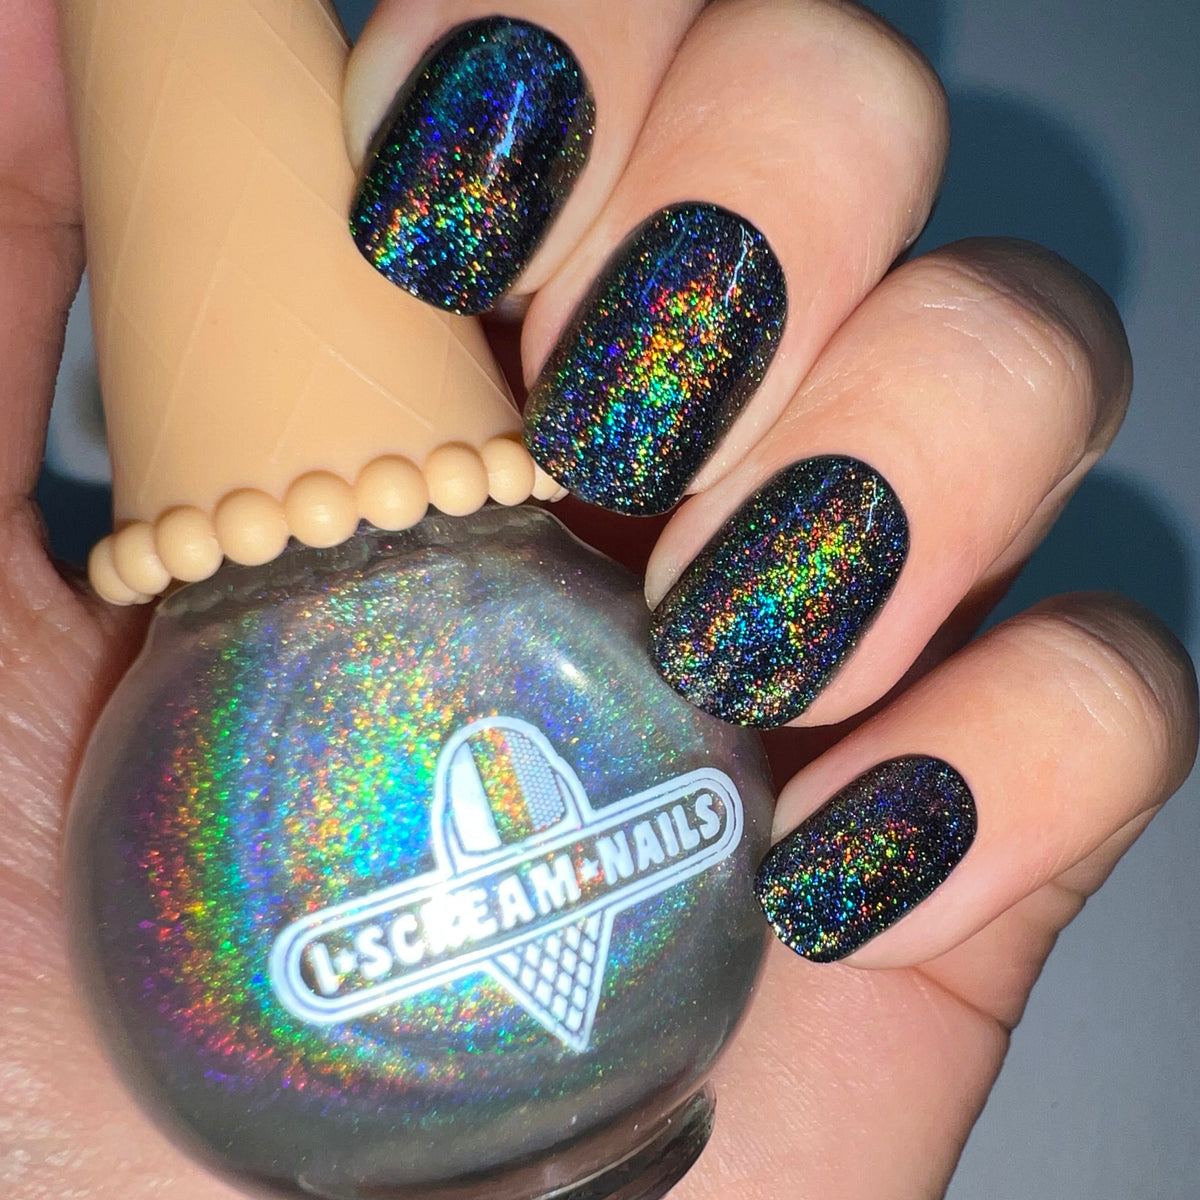 Holo Hail – Twinkled T